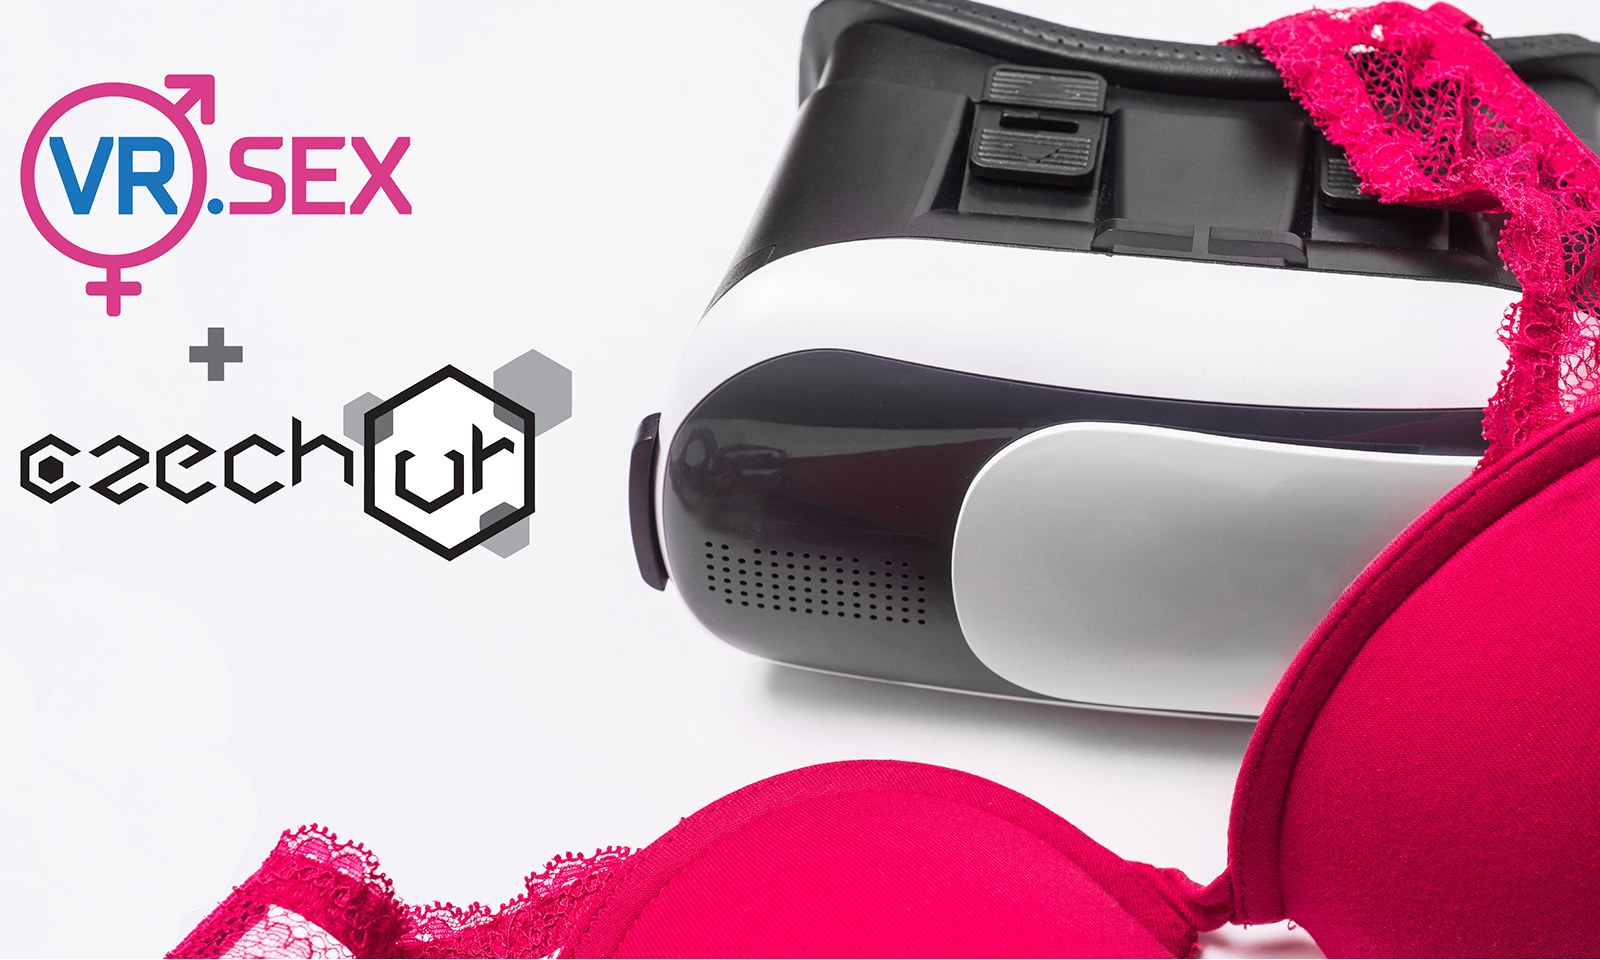 VR.sex Adds CzechVR to Its Growing Collection of Top Quality XXX